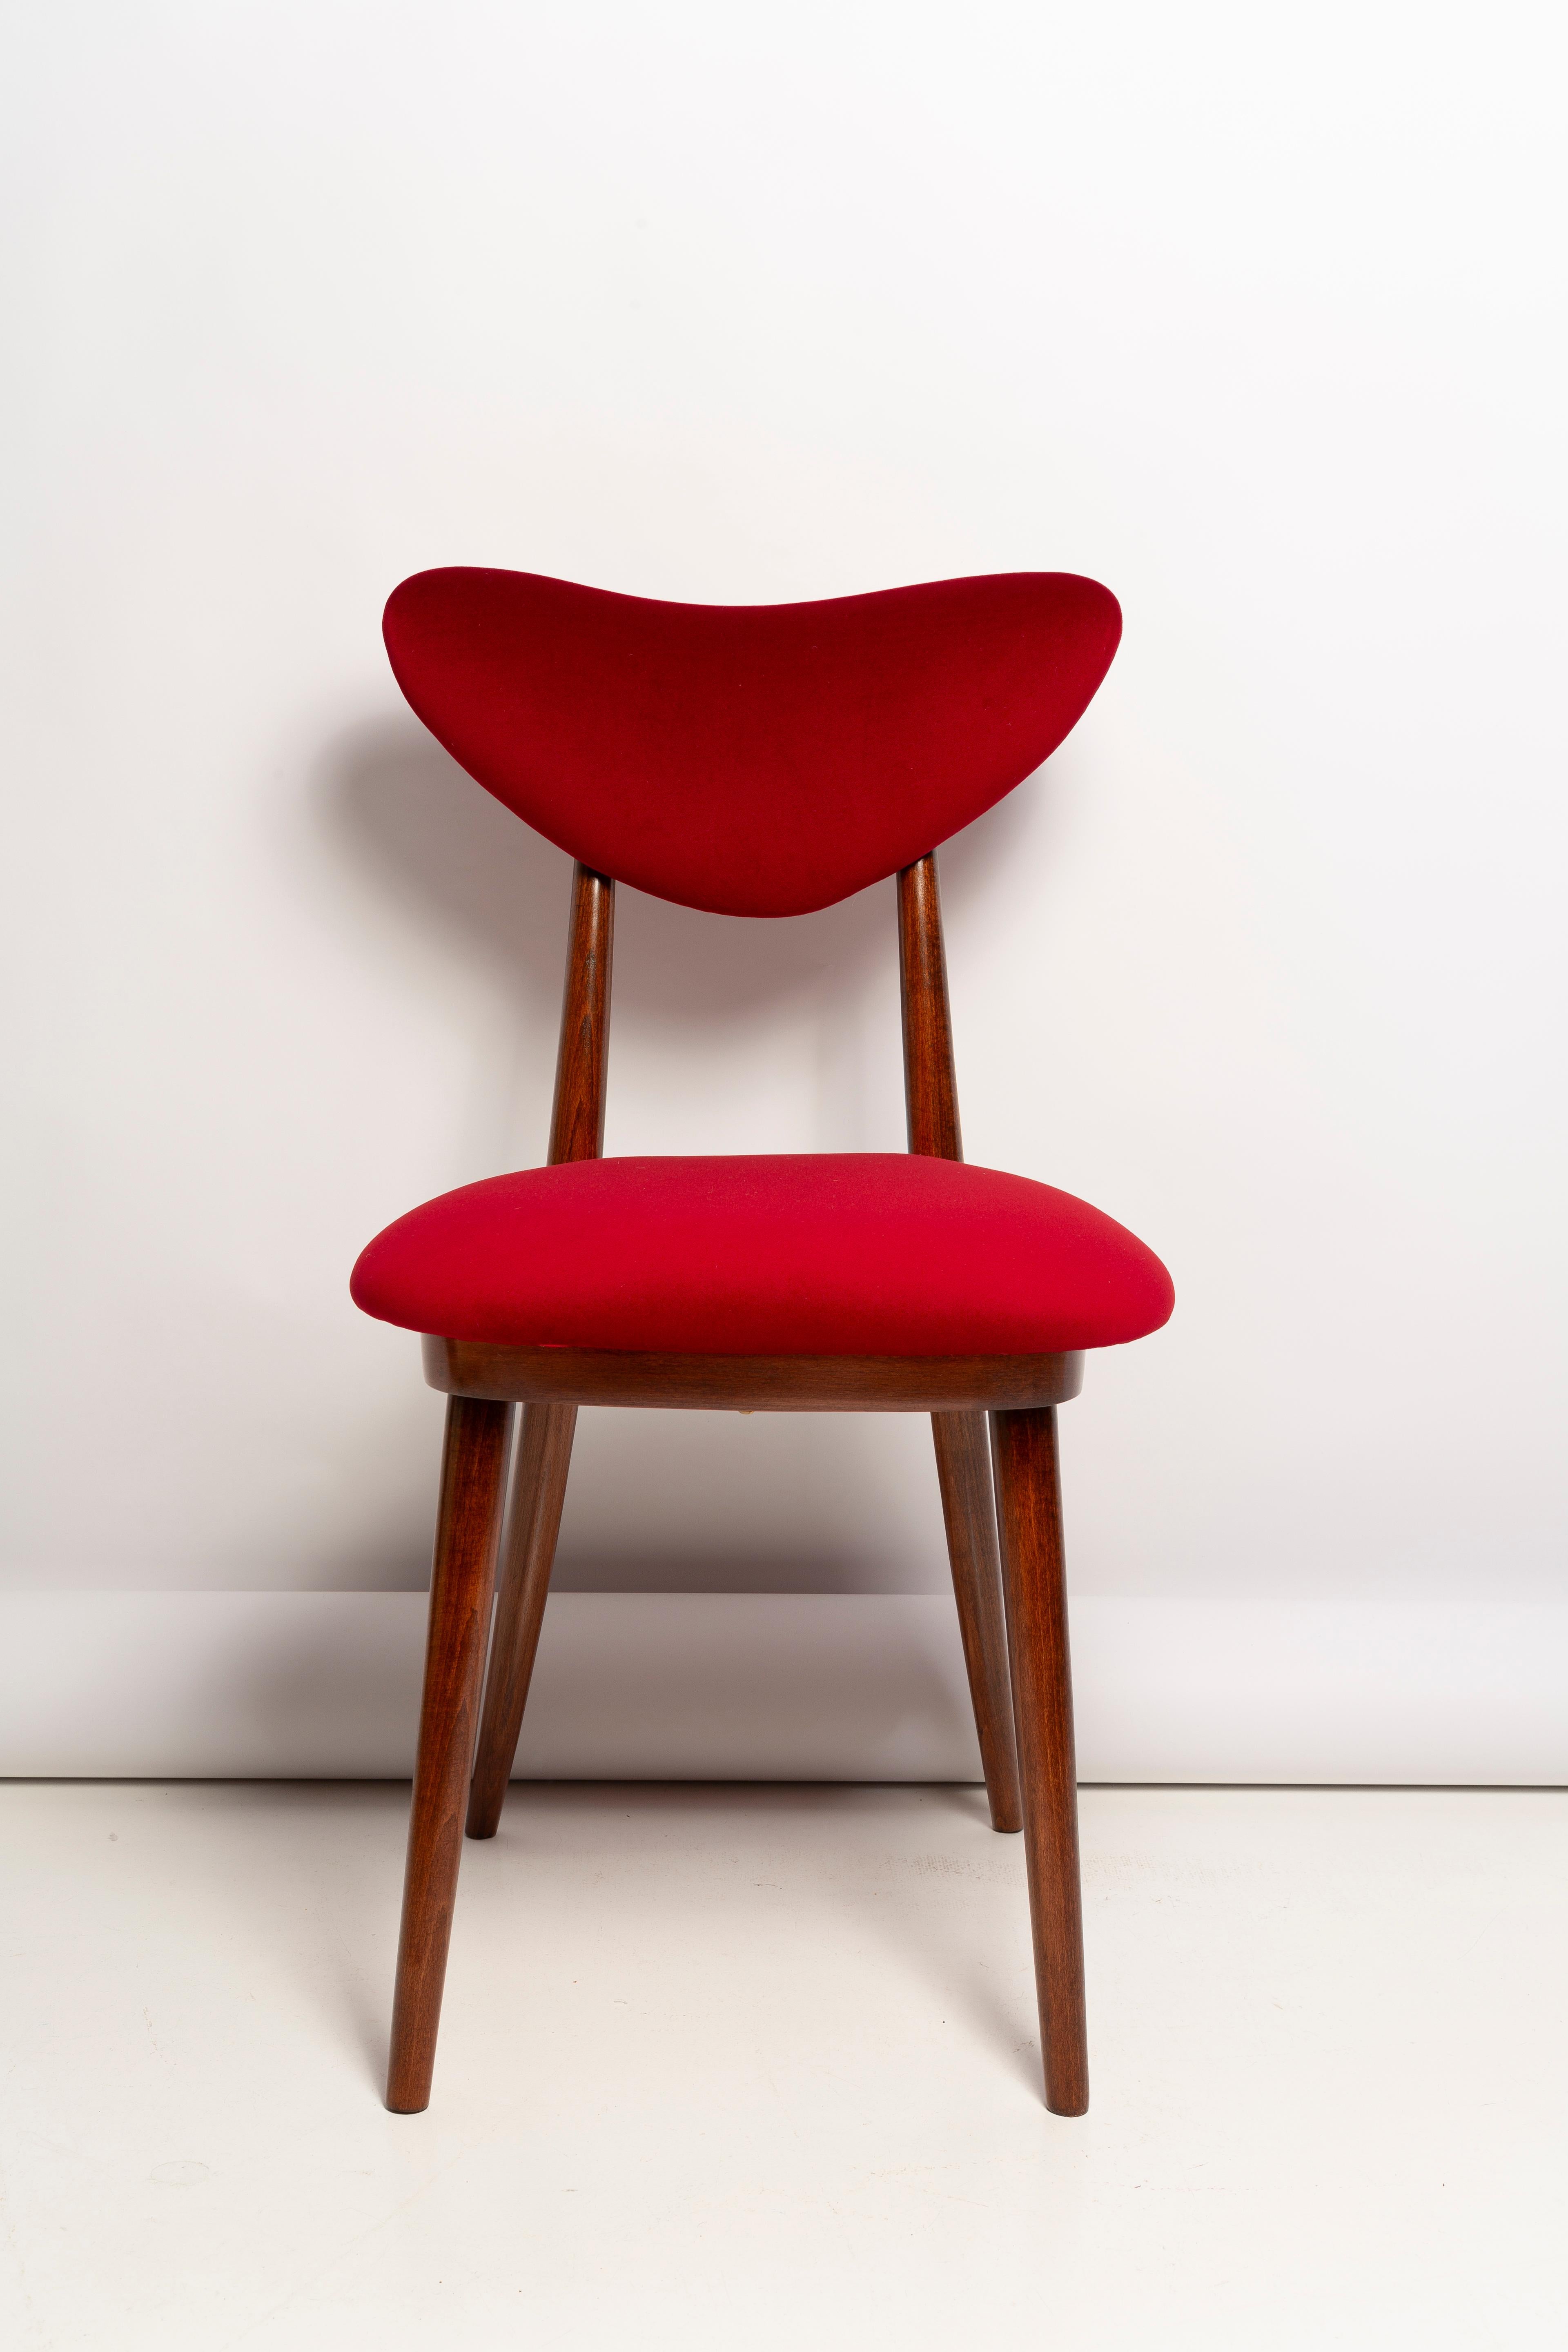 Velvet Pair of Mid Century Red Heart Chairs, Poland, 1960s For Sale